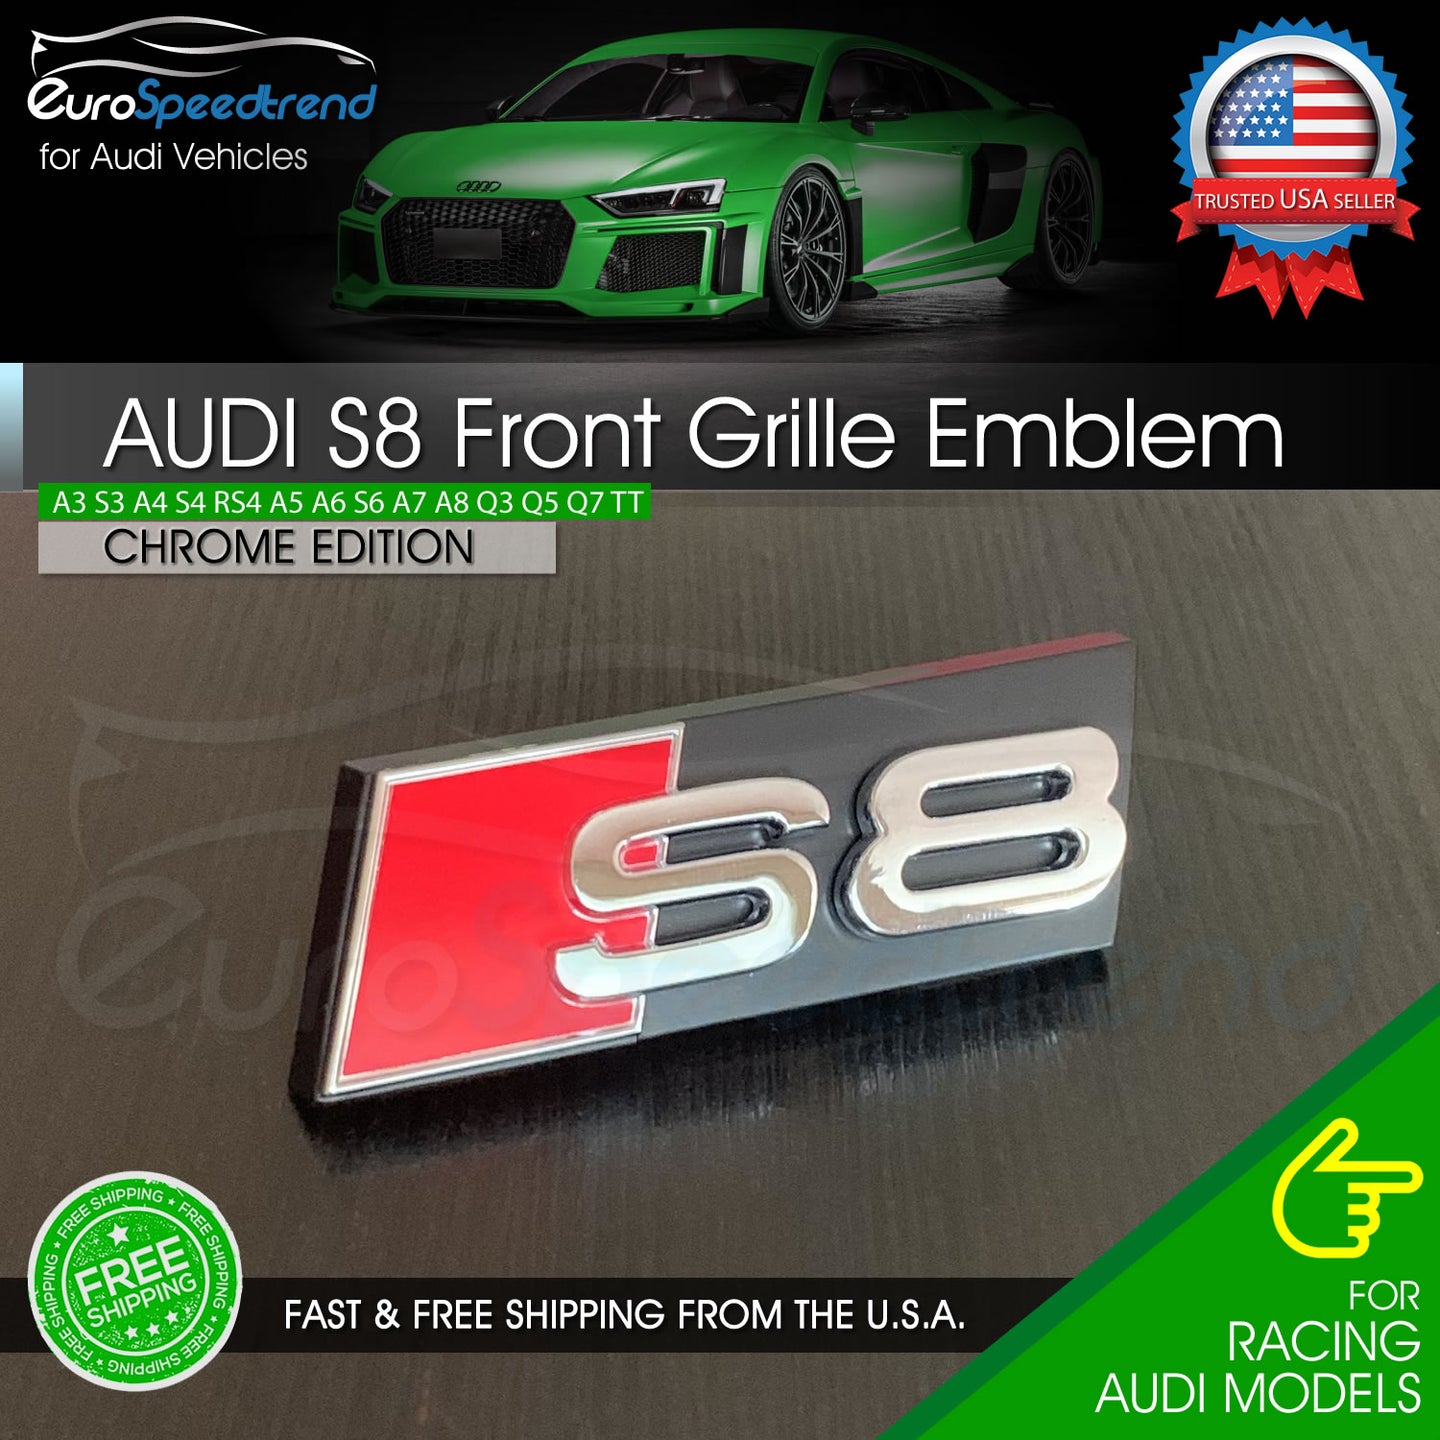 Audi S8 Front Grill Emblem Chrome fit A8 S8 Hood Grille Badge Nameplate OE Spec